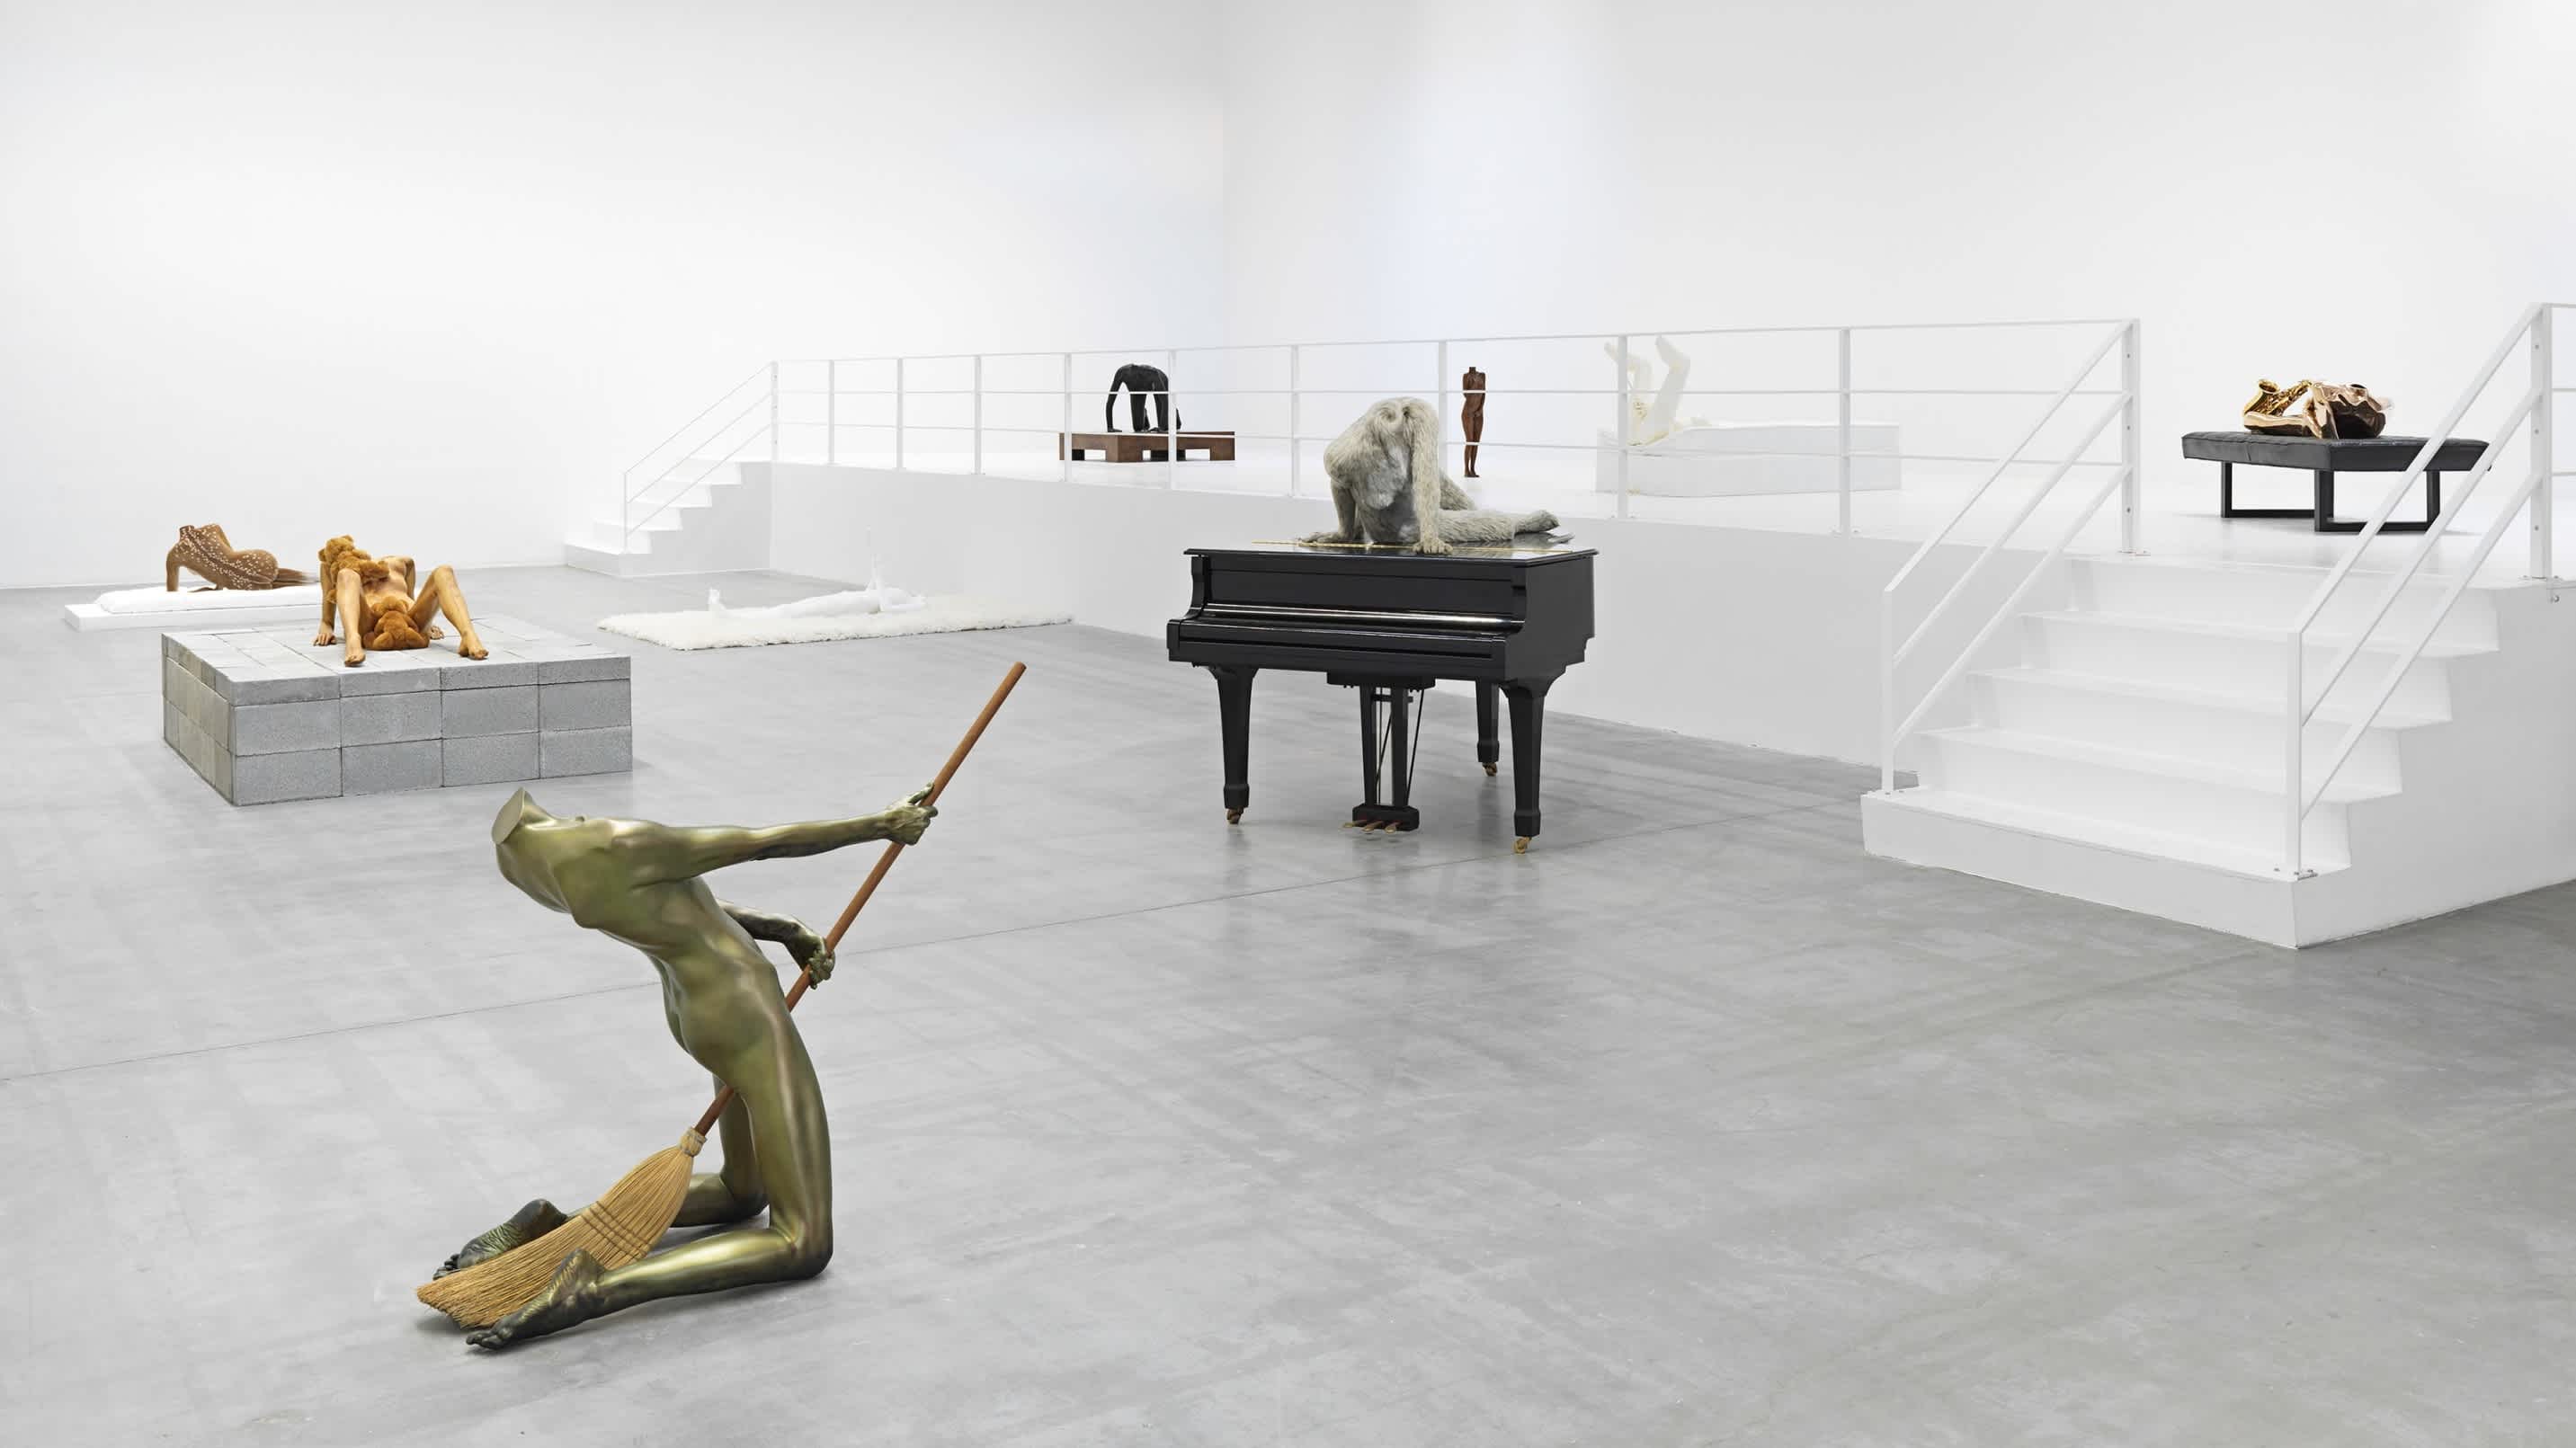 Eight sculptures of the manipulated human body are positioned throughout a concrete-floored, and white-walled room. 